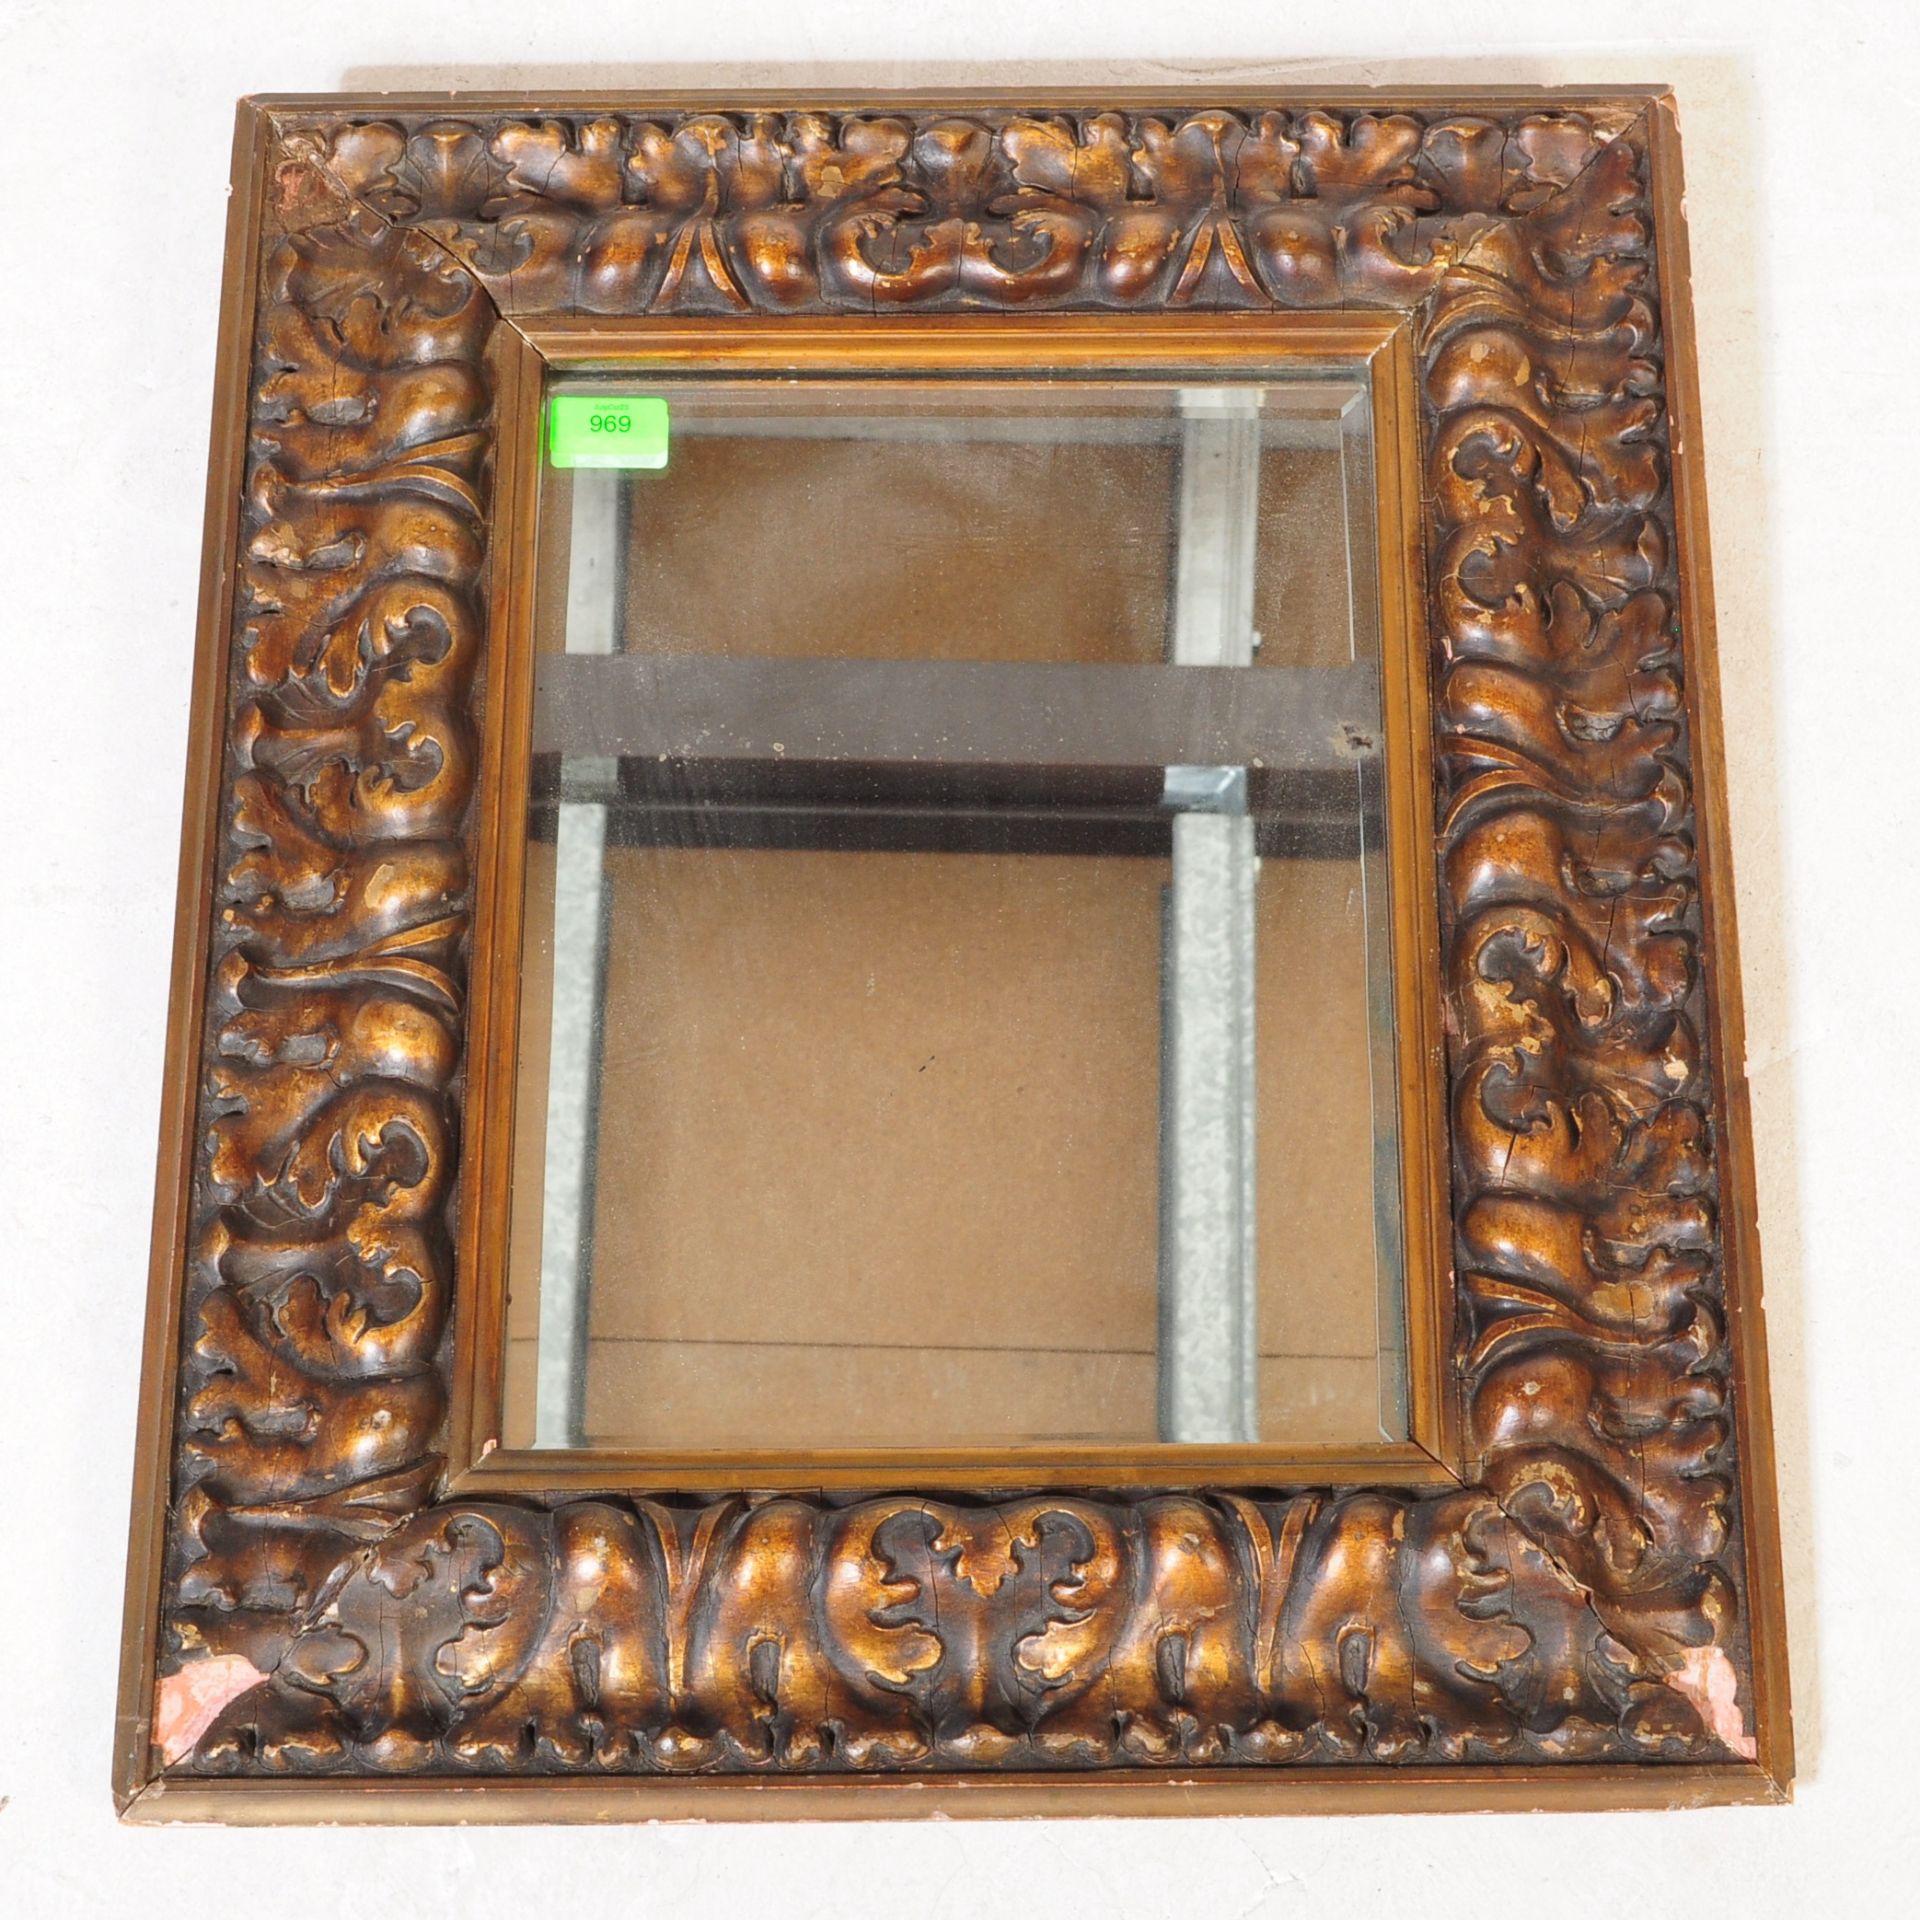 EARLY TO MID 20TH CENTURY GILT WALL MOUNTED MIRROR - Image 2 of 4